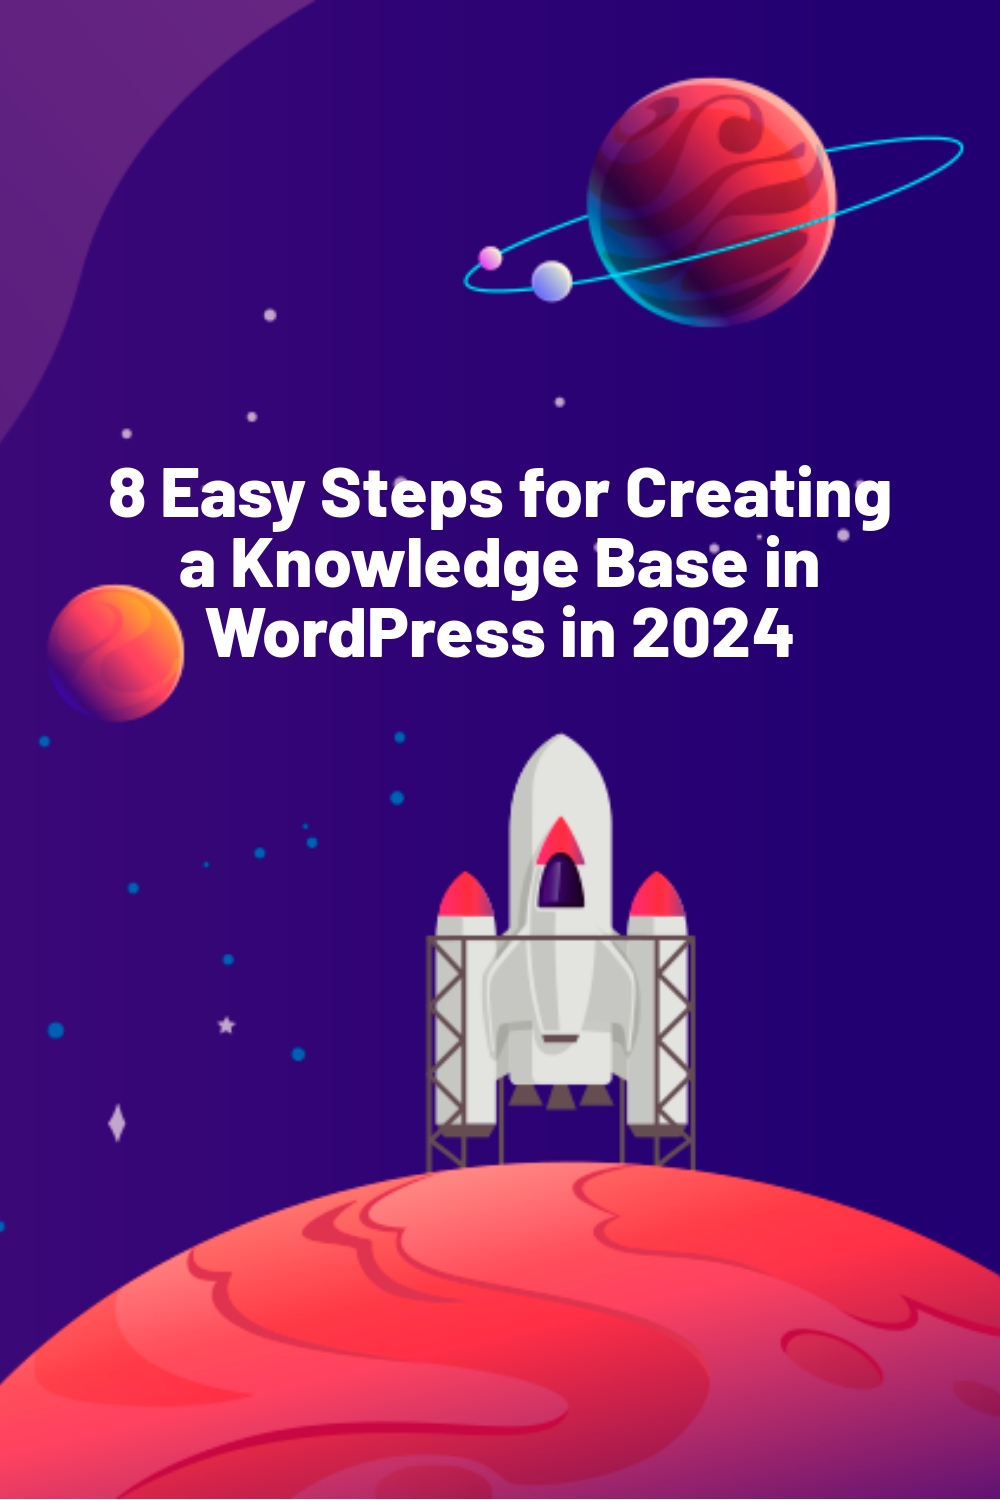 8 Easy Steps for Creating a Knowledge Base in WordPress in 2024